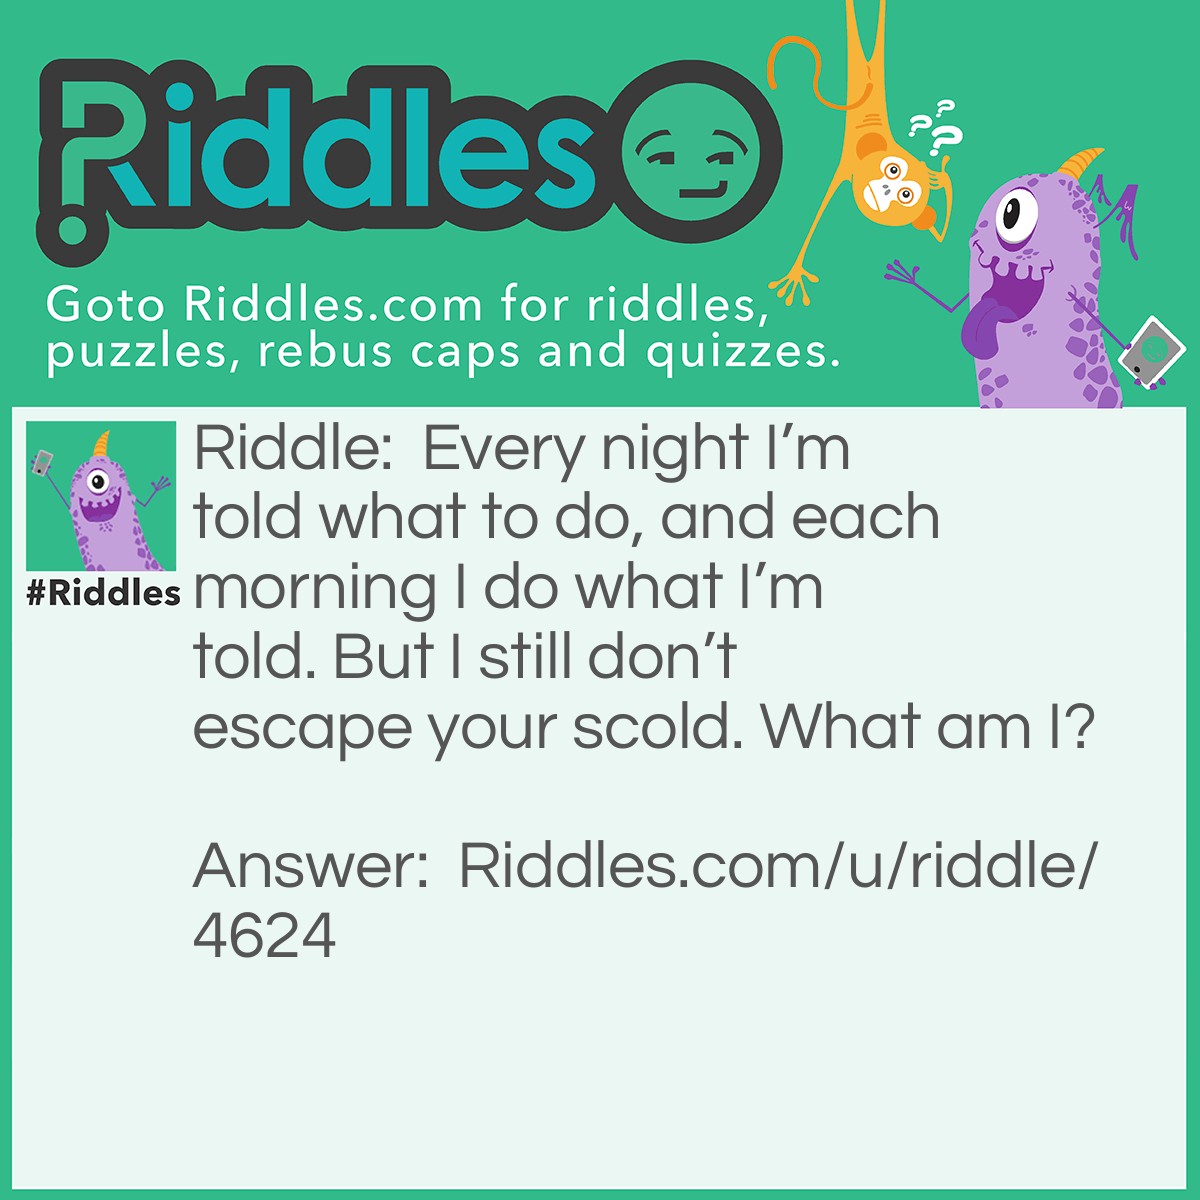 Riddle: Every night I'm told what to do, and each morning I do what I'm told. But I still don't escape your scold. What am I? Answer: An alarm clock.